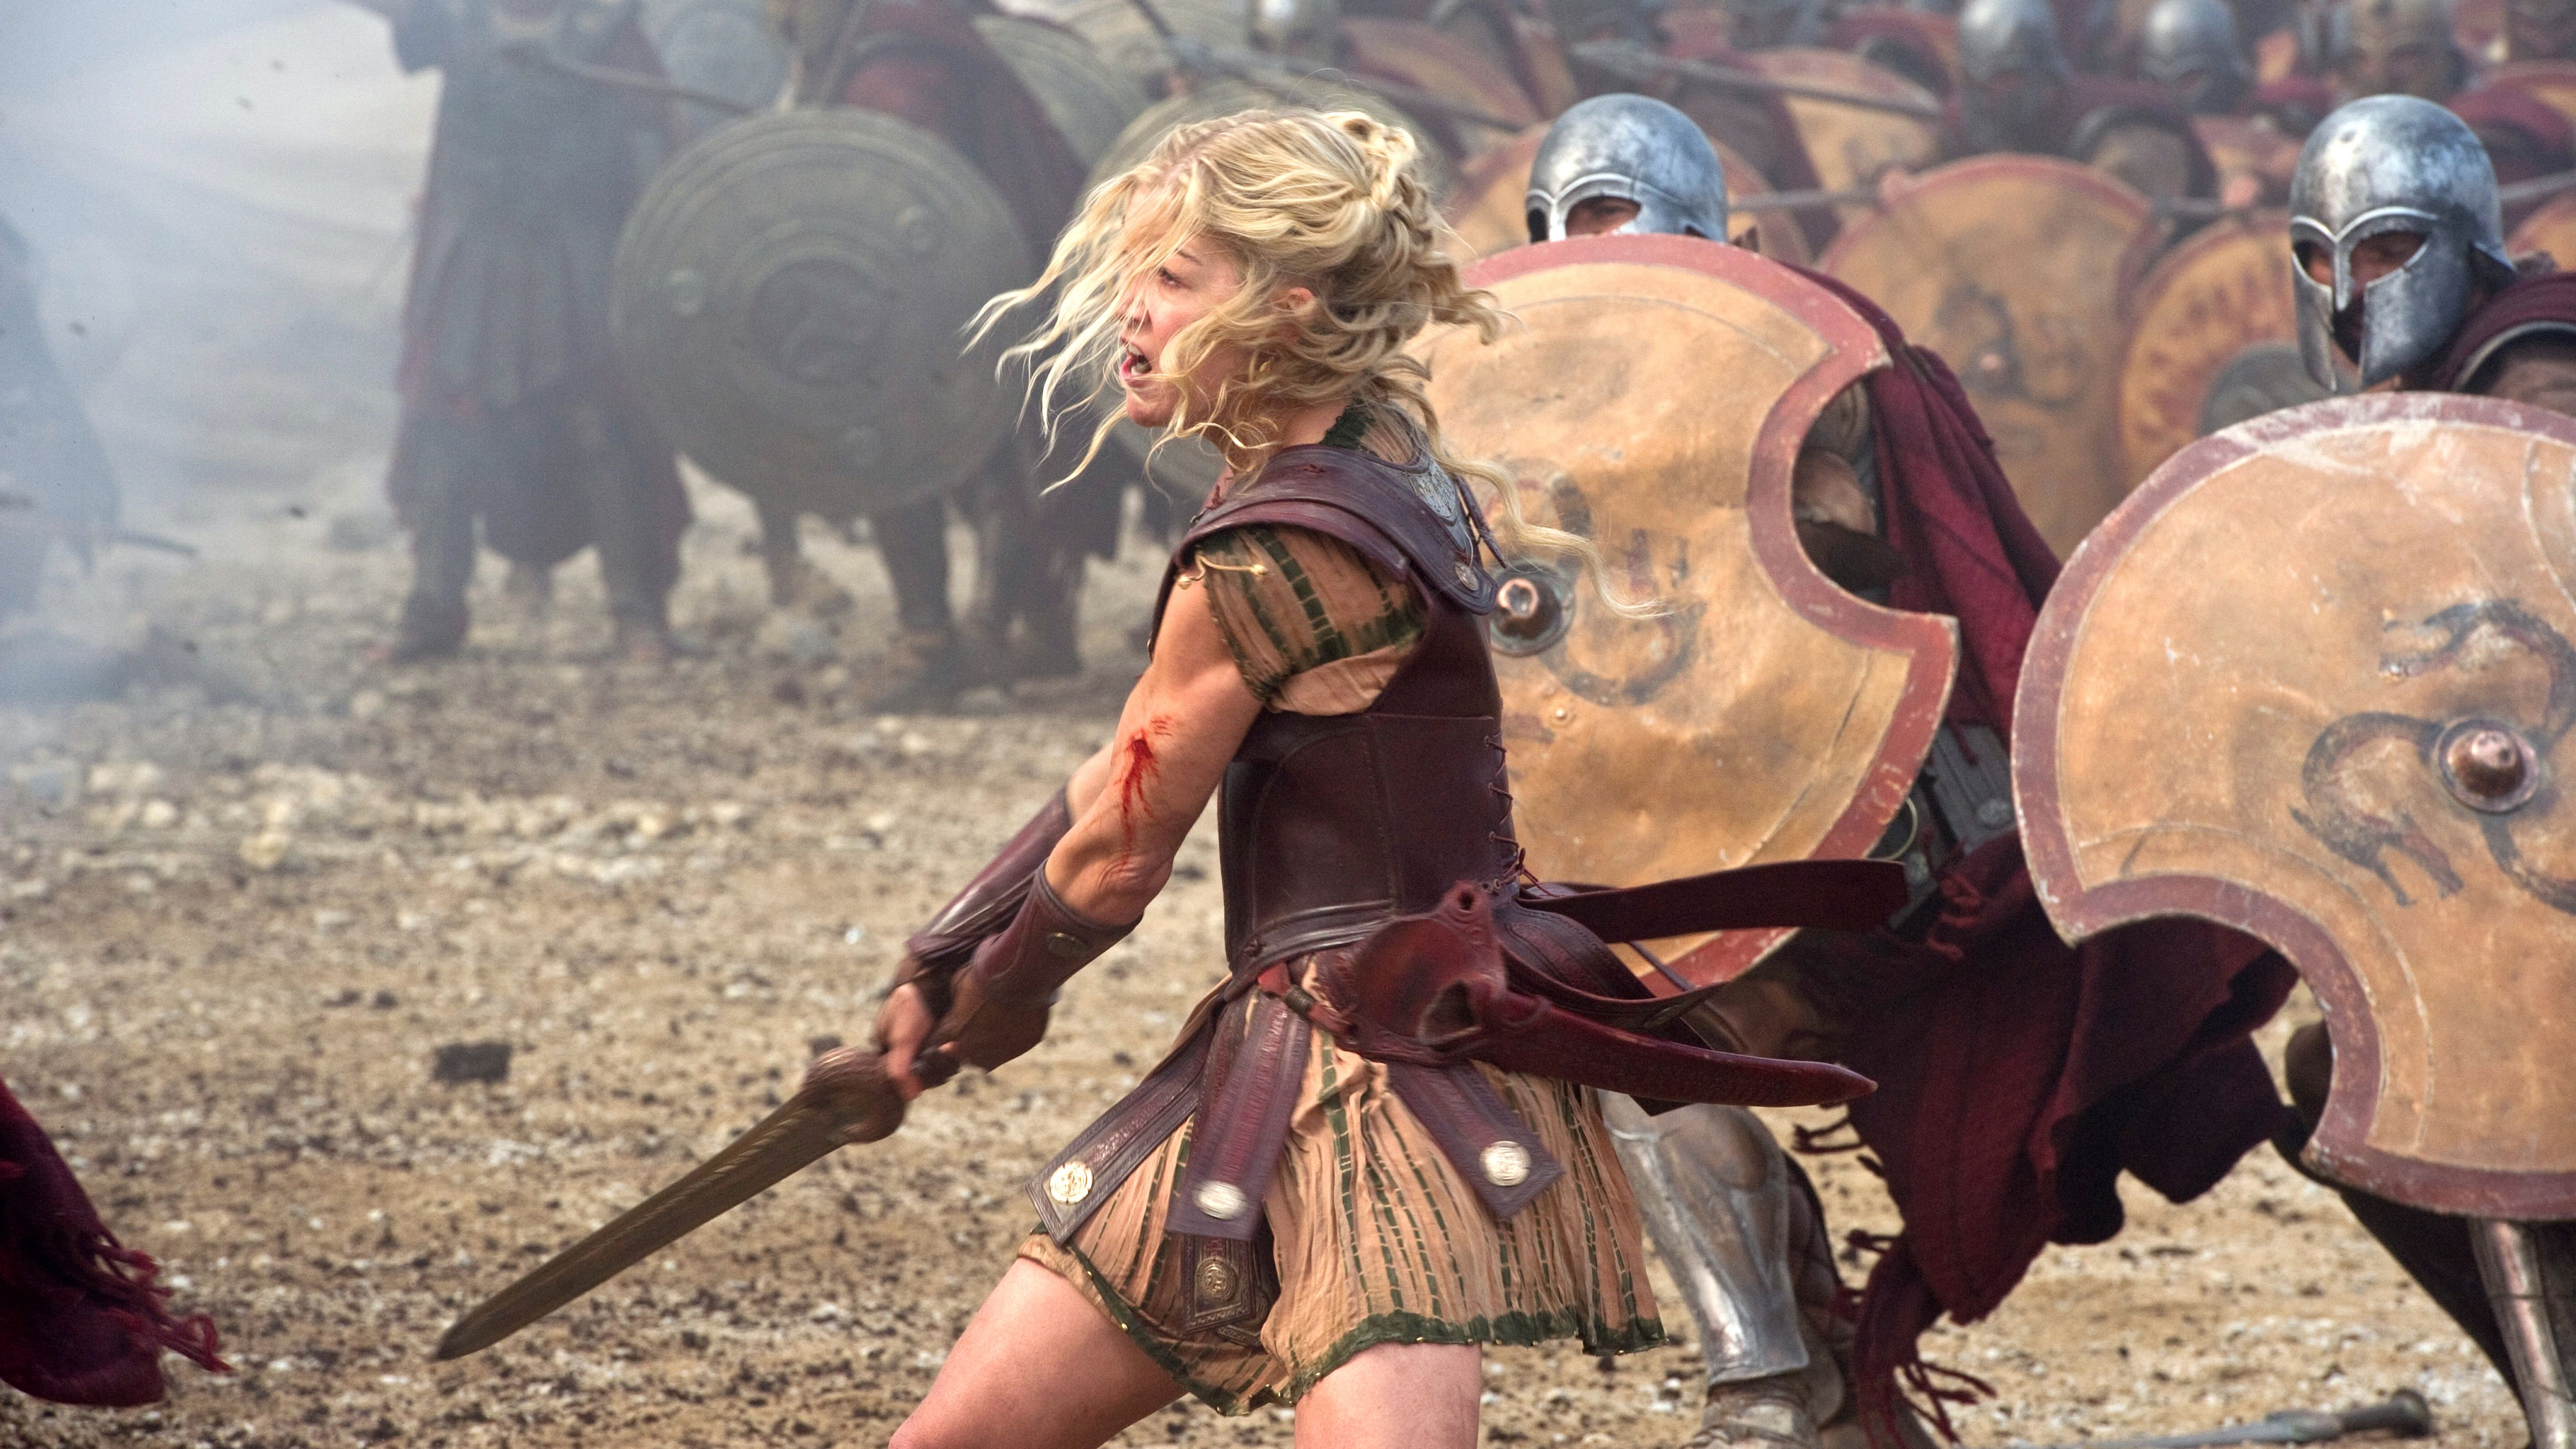 Movie Wrath Of The Titans HD Wallpaper | Background Image